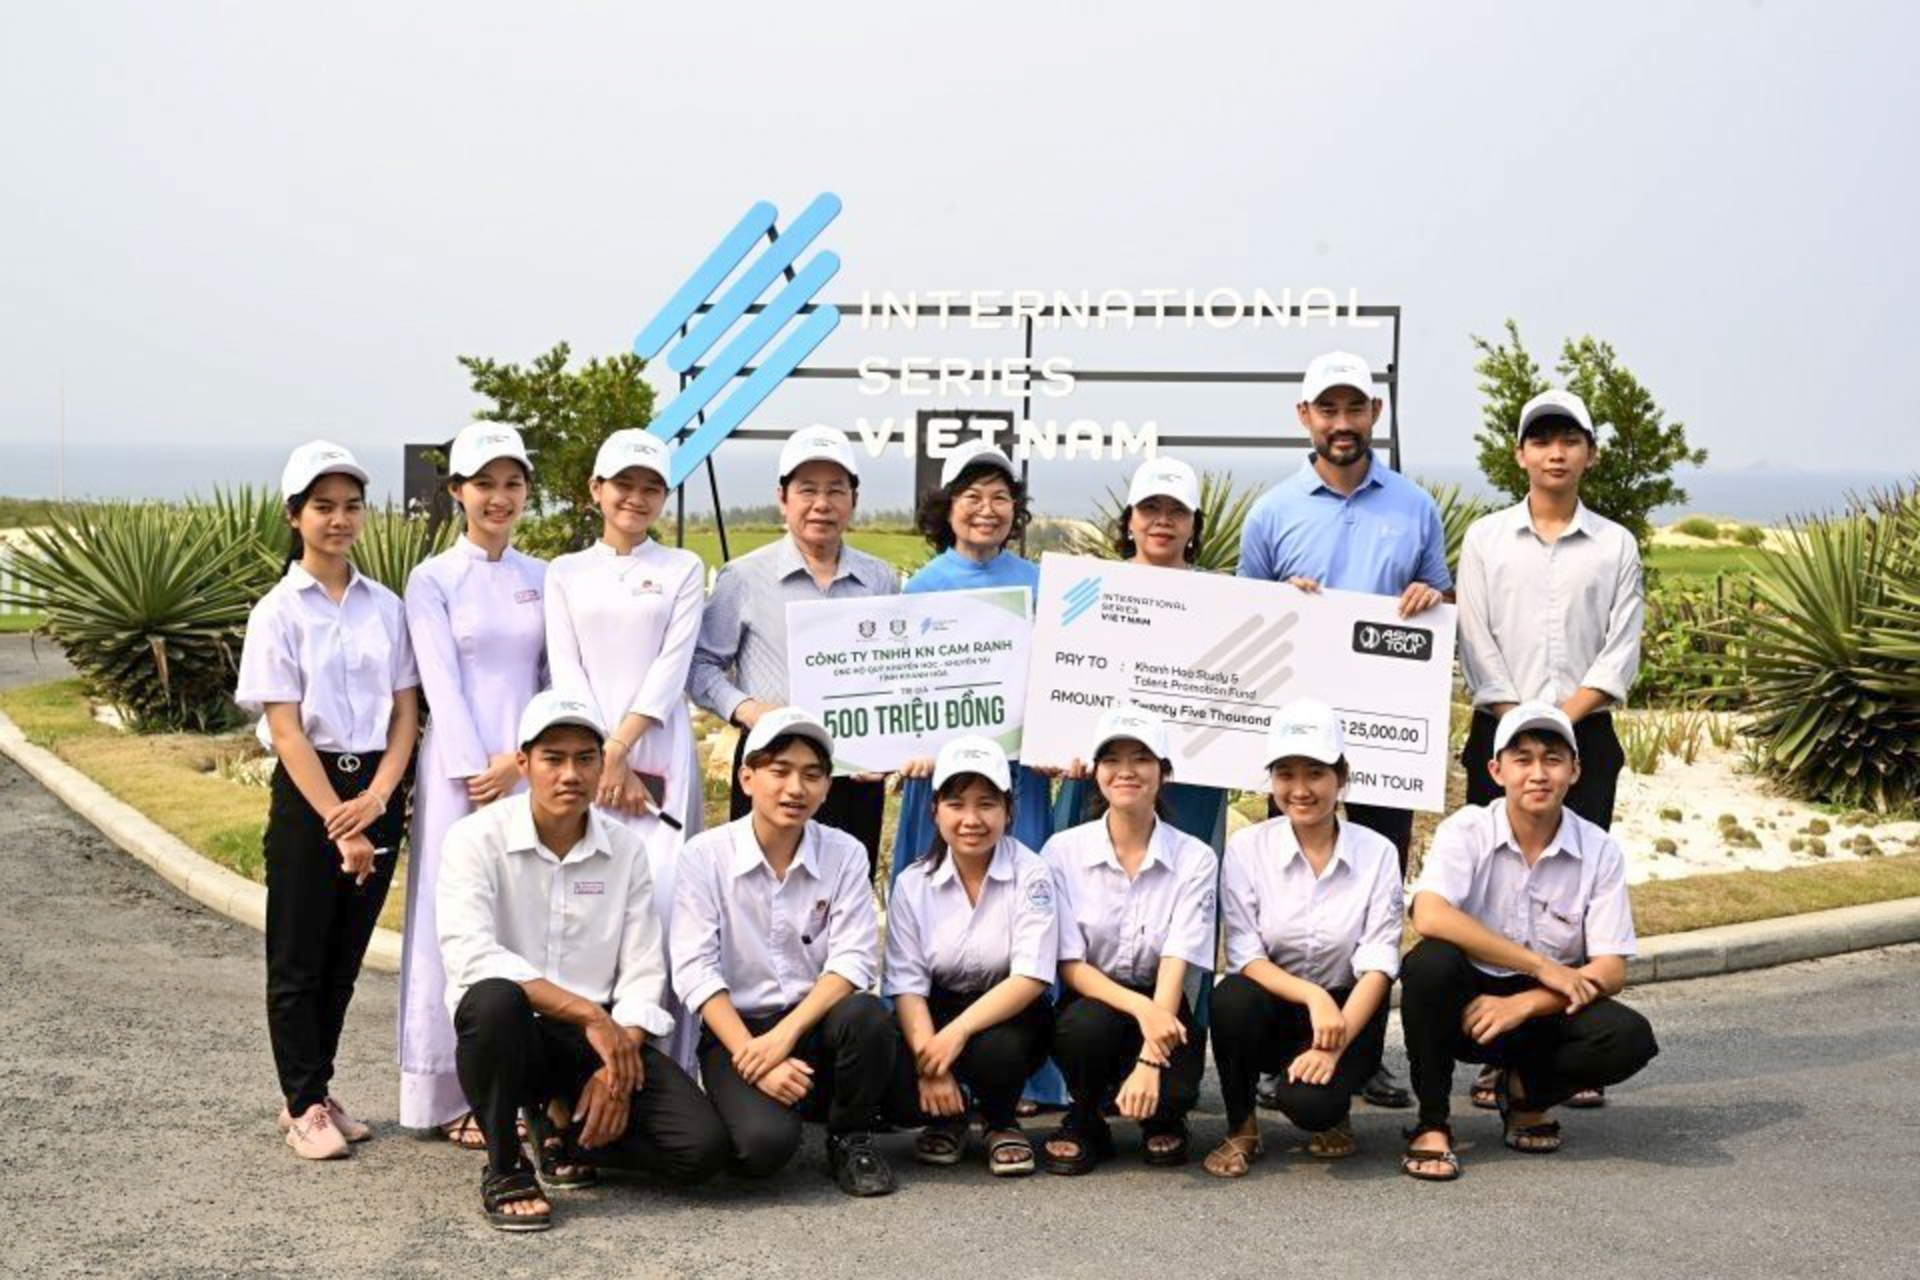 Le Van Kiem (left), chairman of KN Group (back line, 4th from left) offering symbolic cheque for VND500 million to Khanh Hoa Study and Talent Promotion Fund (Photo: Asian Tour)

